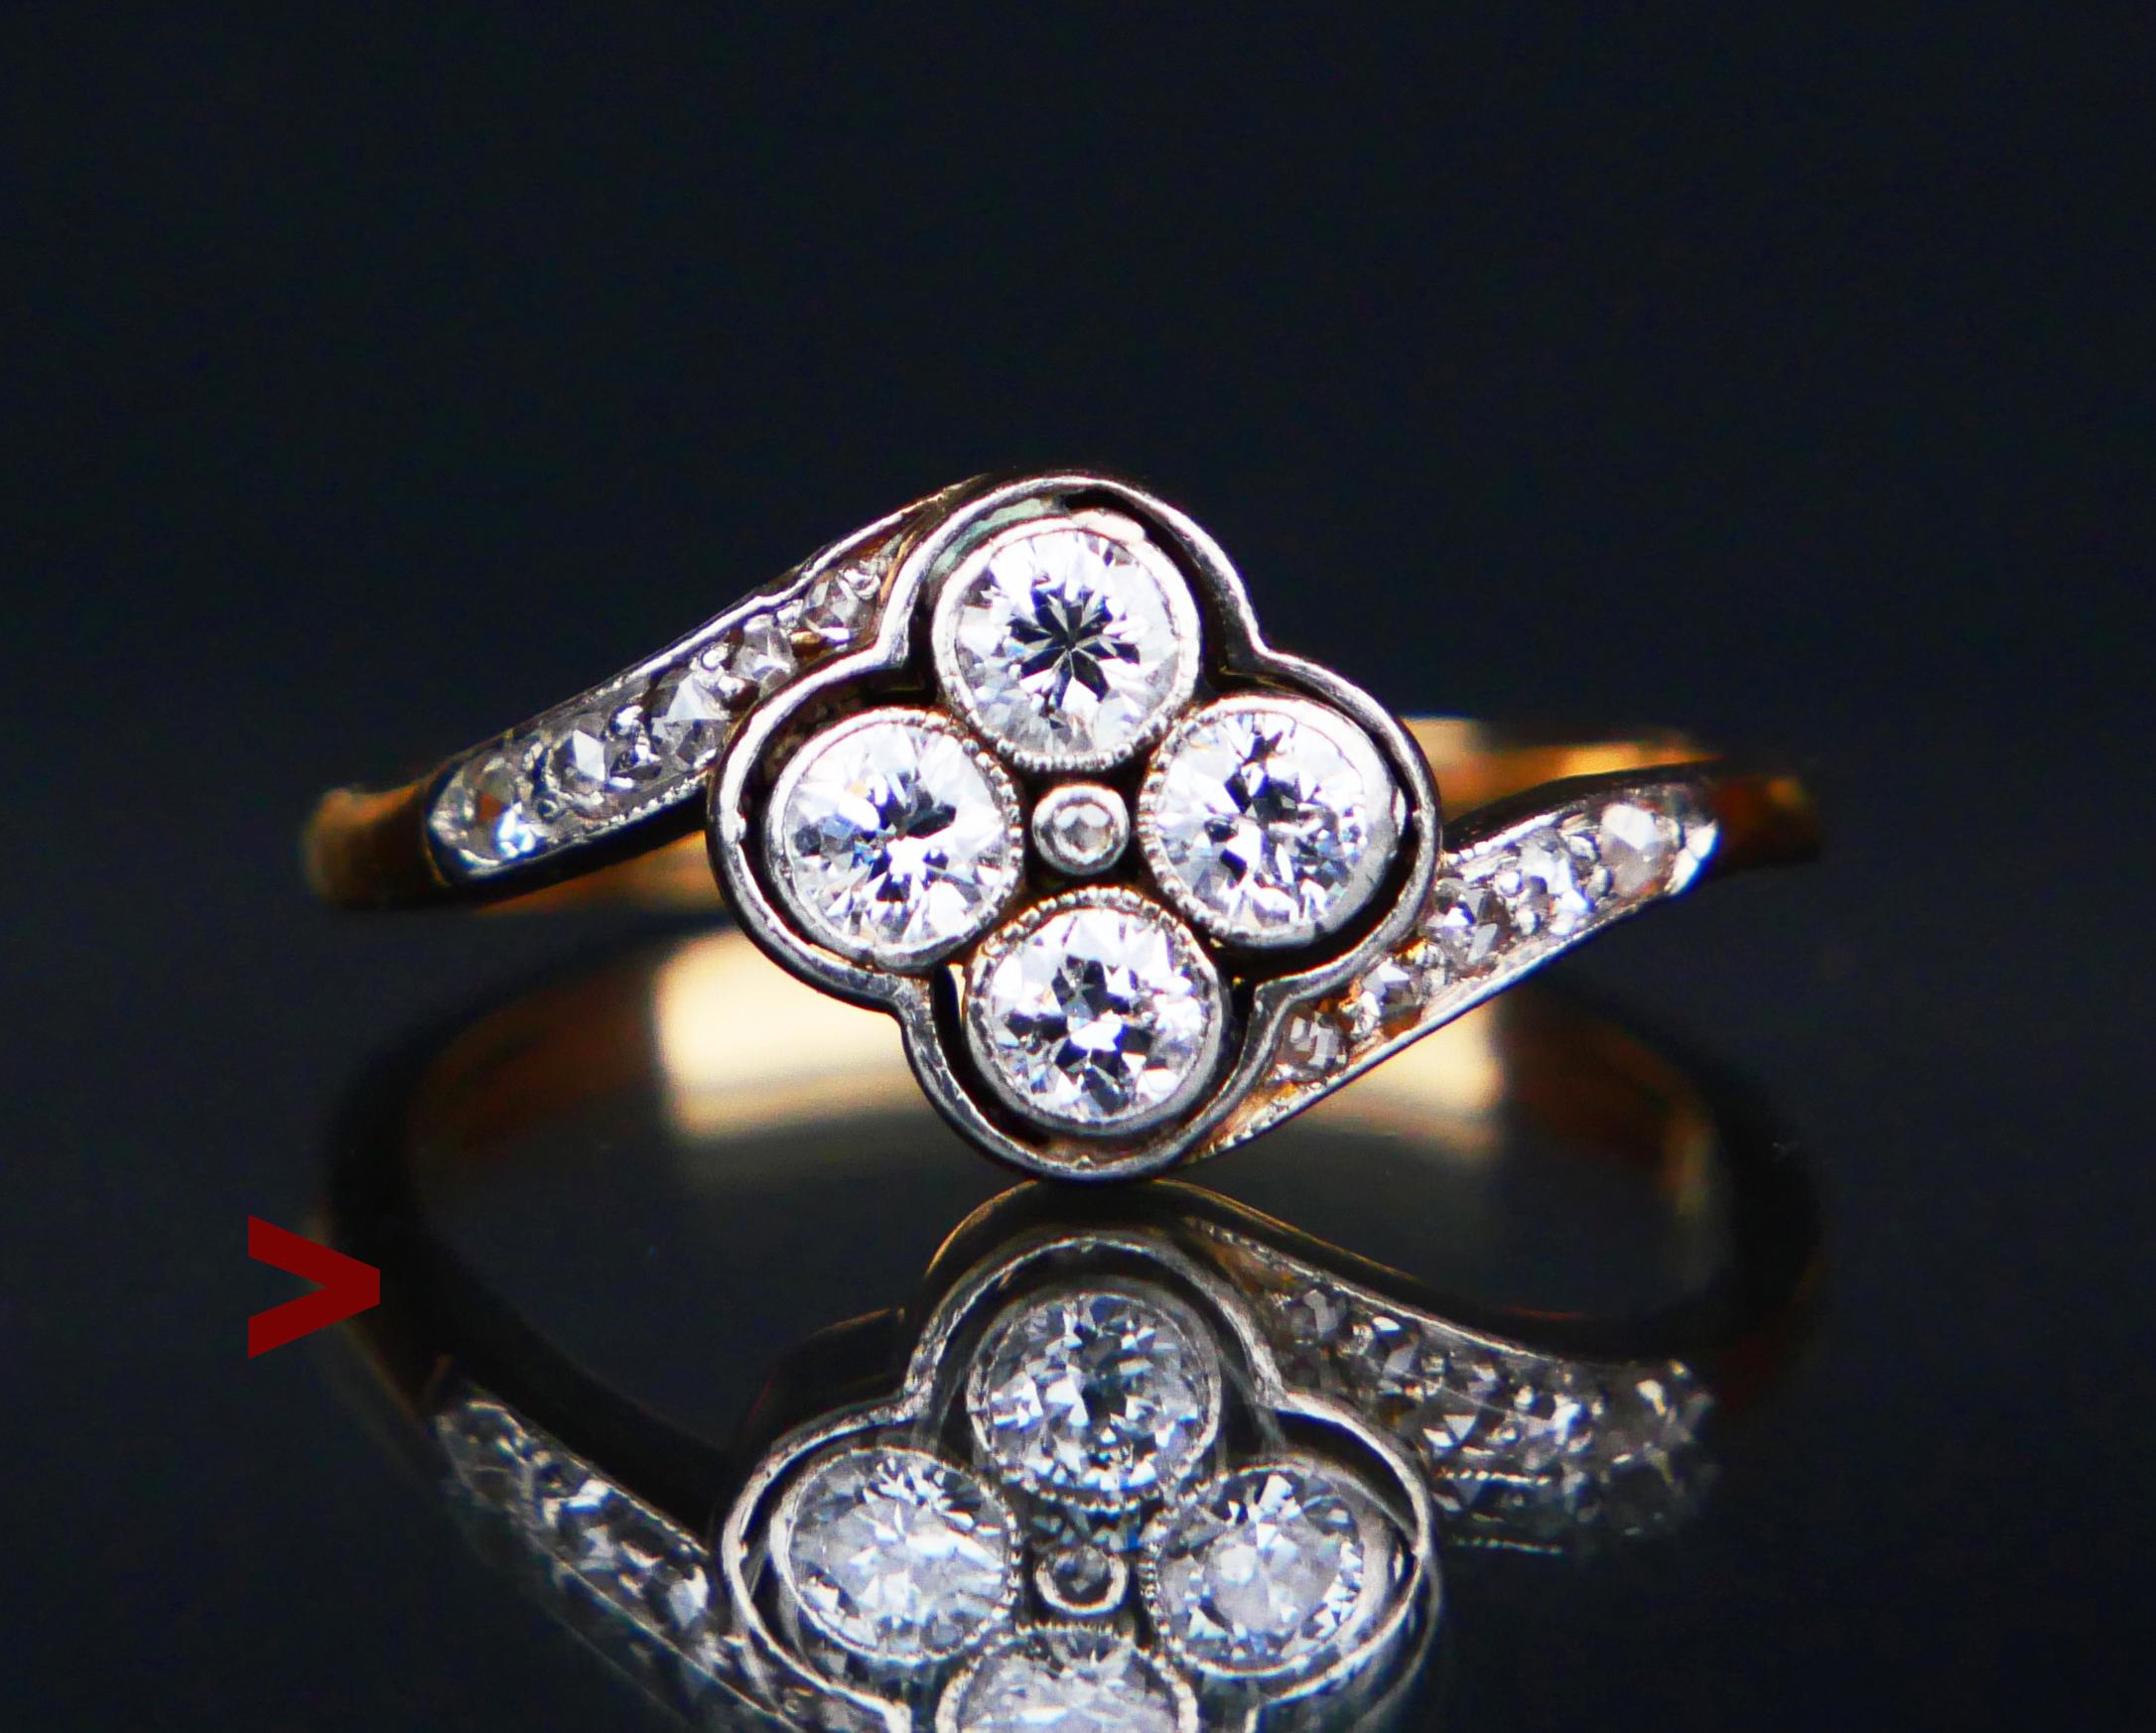 Antique ca. early ca. 1900's -1920s Ring featuring Platinum on solid 14K Yellow Gold twisted frame with four bezel set old diamond cut Diamonds Ø 3 mm / 0.12 ct each accented with 11 pave set rose cut cut Diamonds of gradual diameters. Total weight